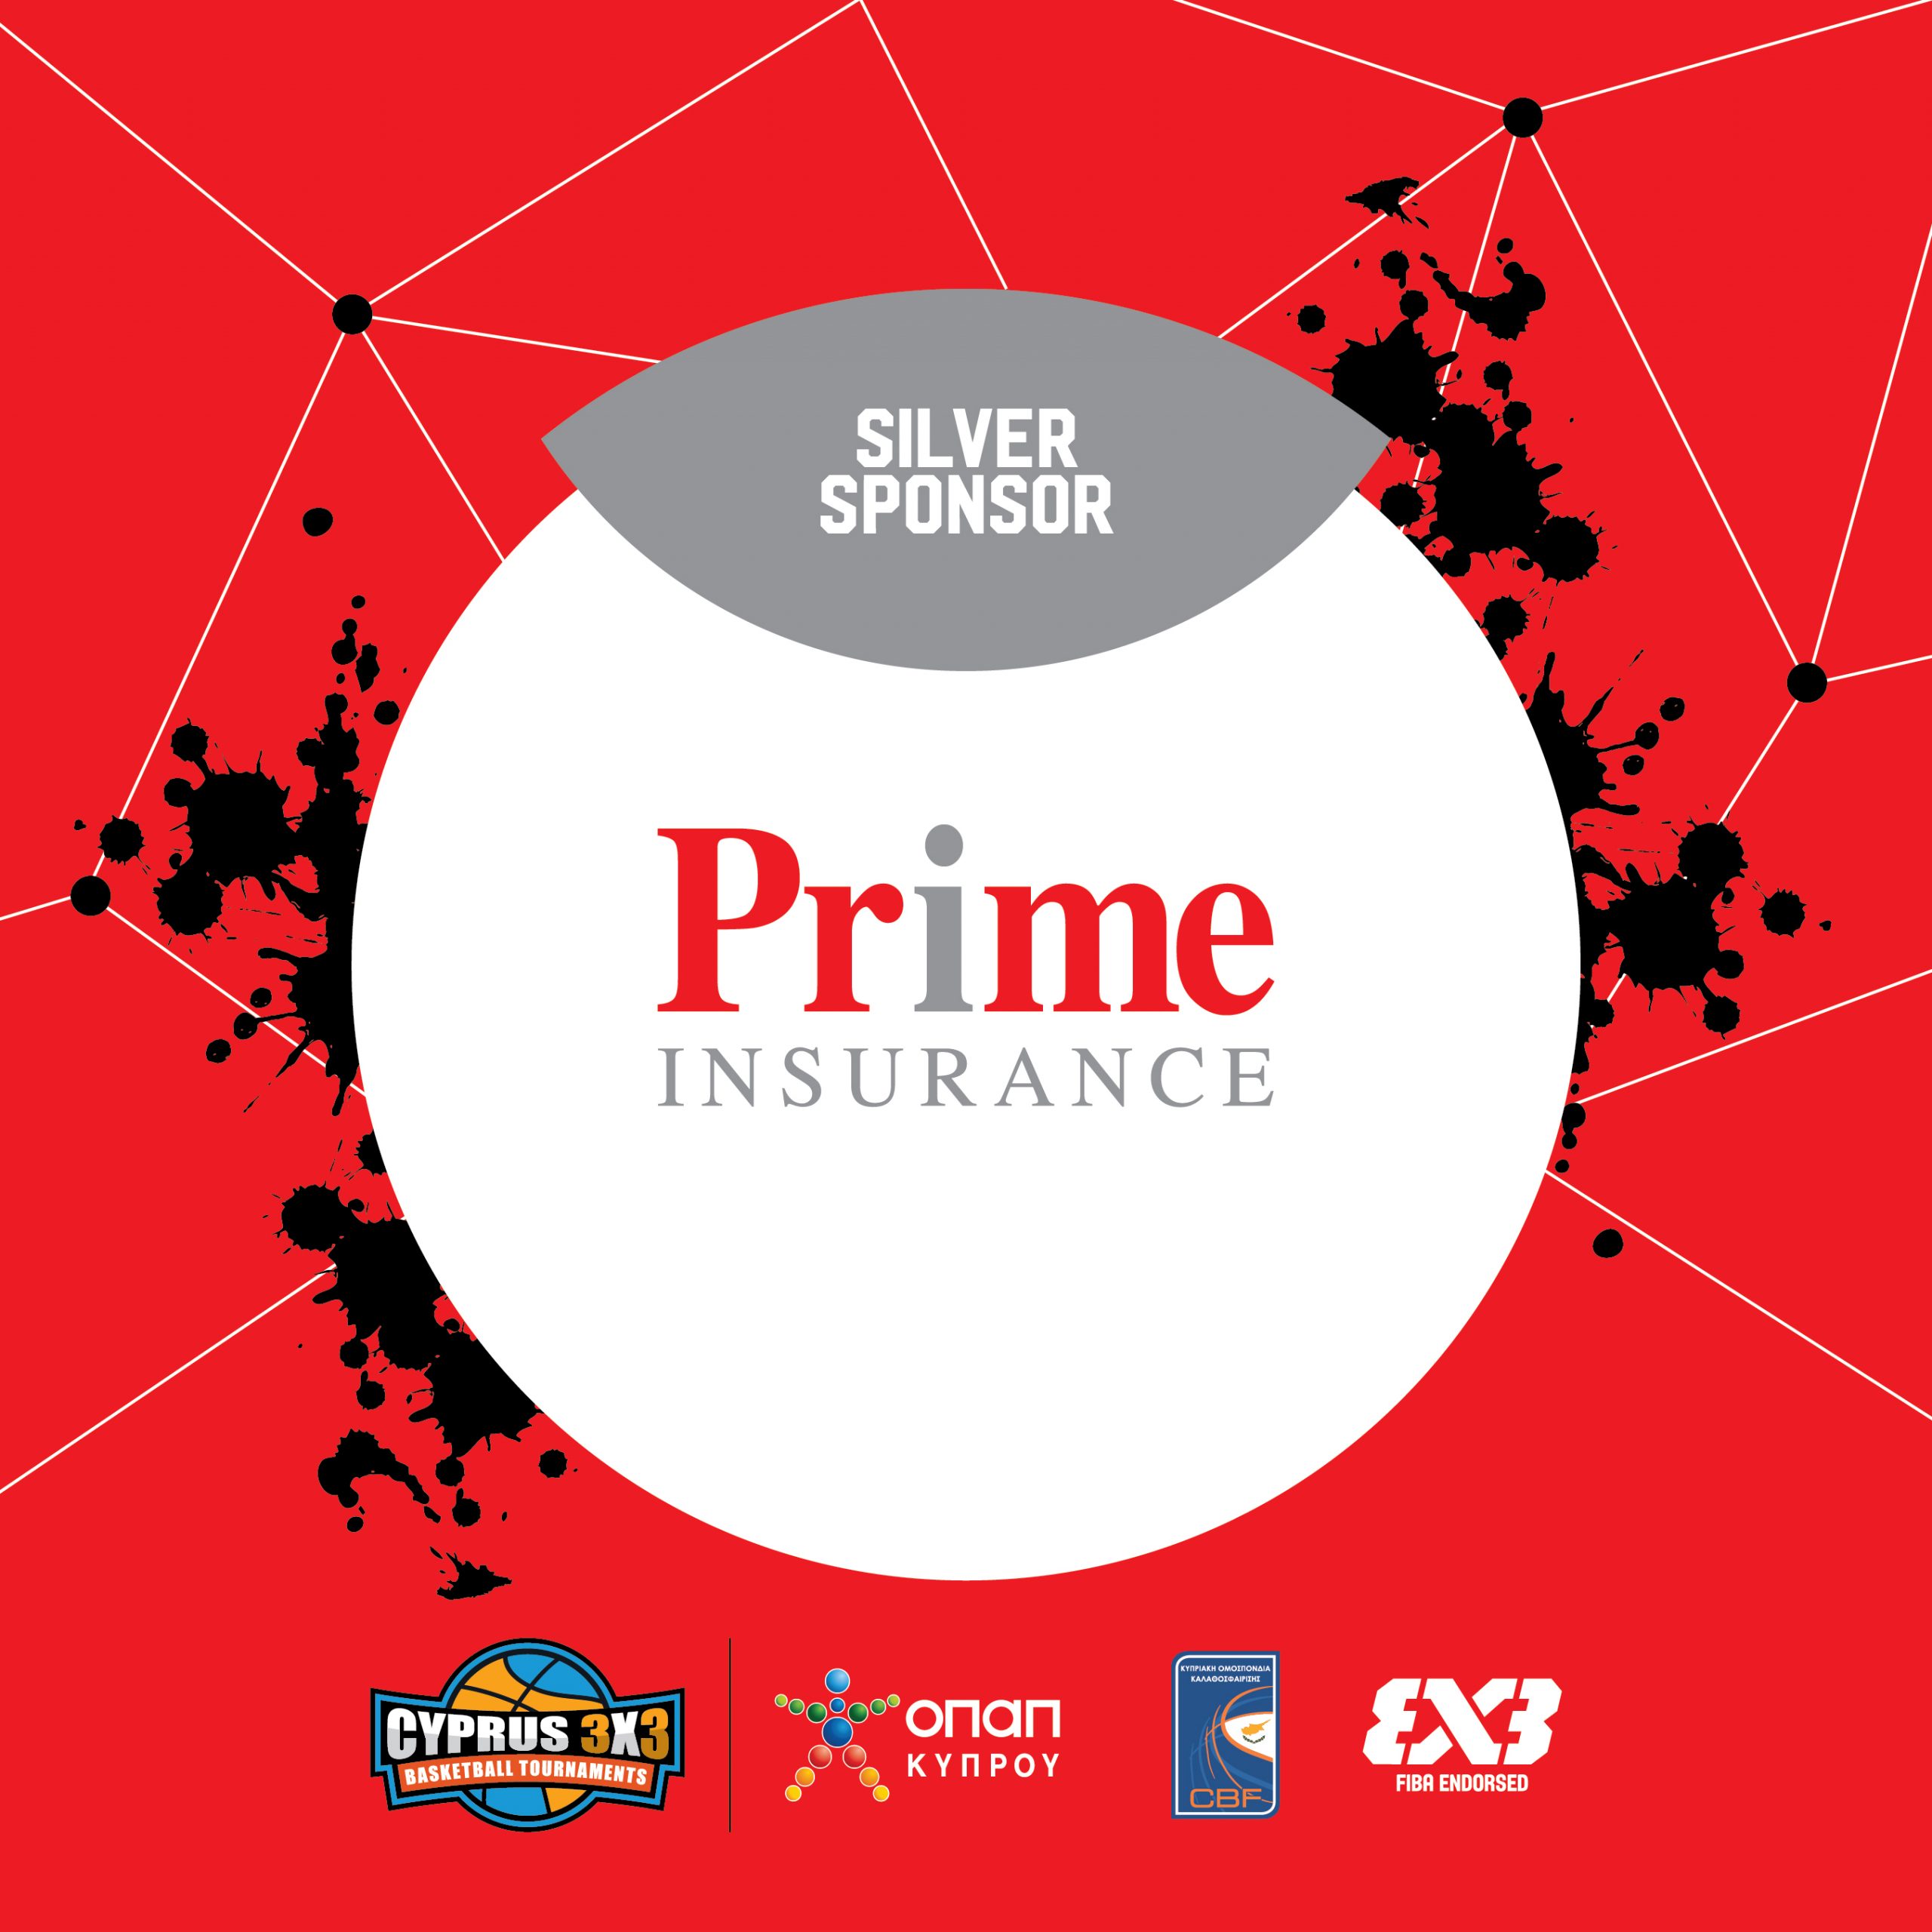 You are currently viewing Prime Insurance Supports Cyprus 3×3 as a Silver Sponsor ￼